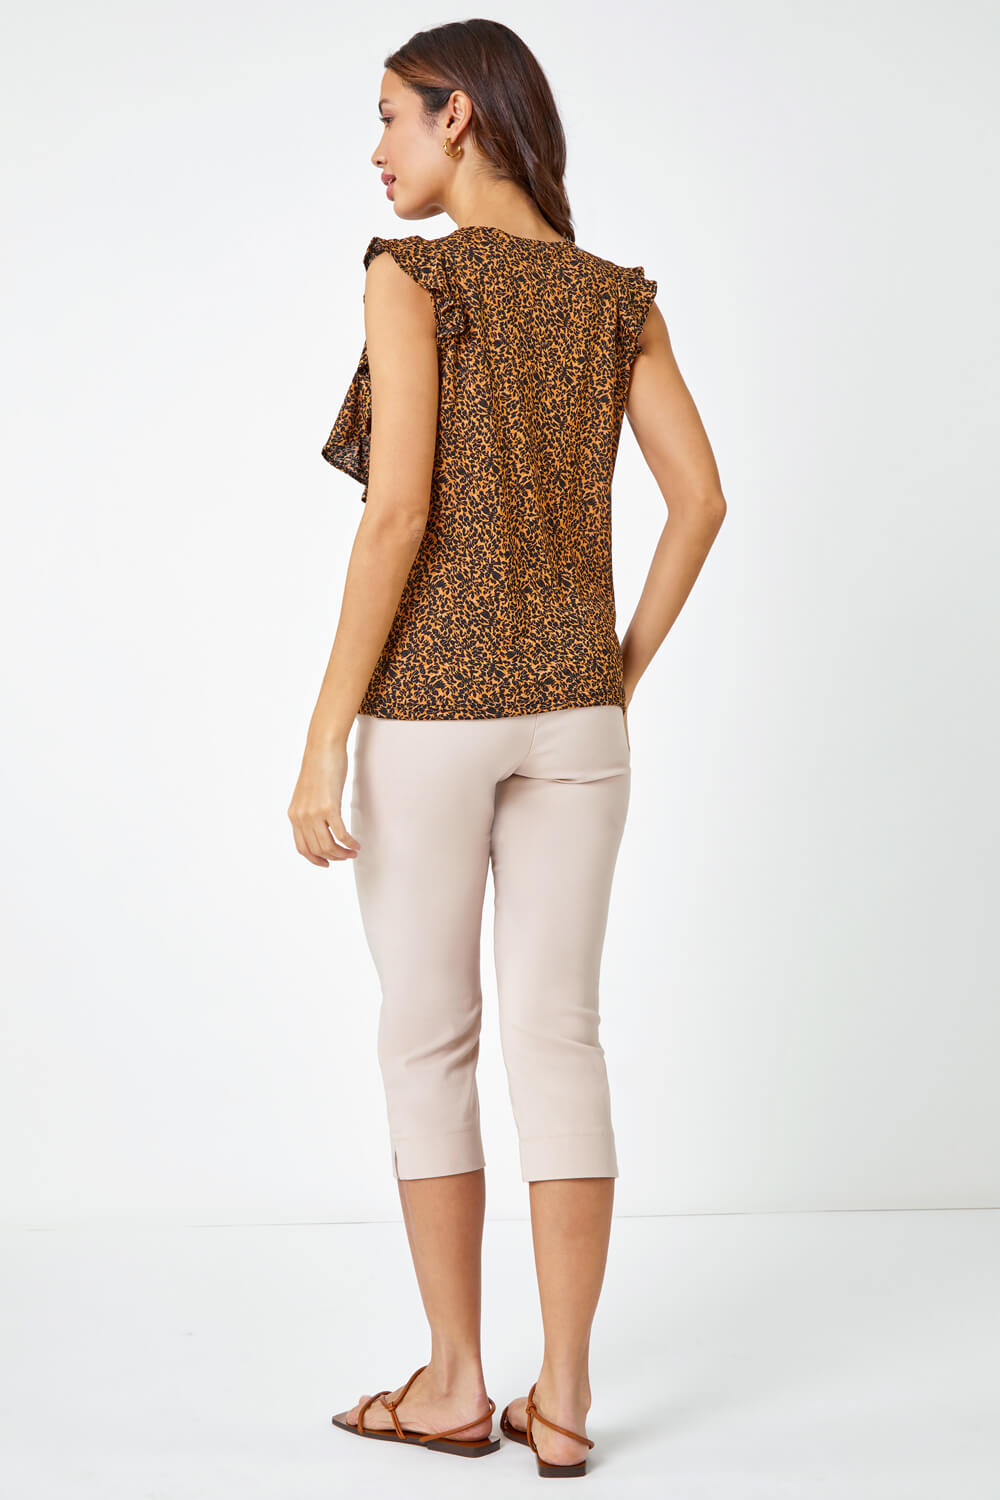 Brown Leopard Print Frill Detail Jersey Top, Image 3 of 5